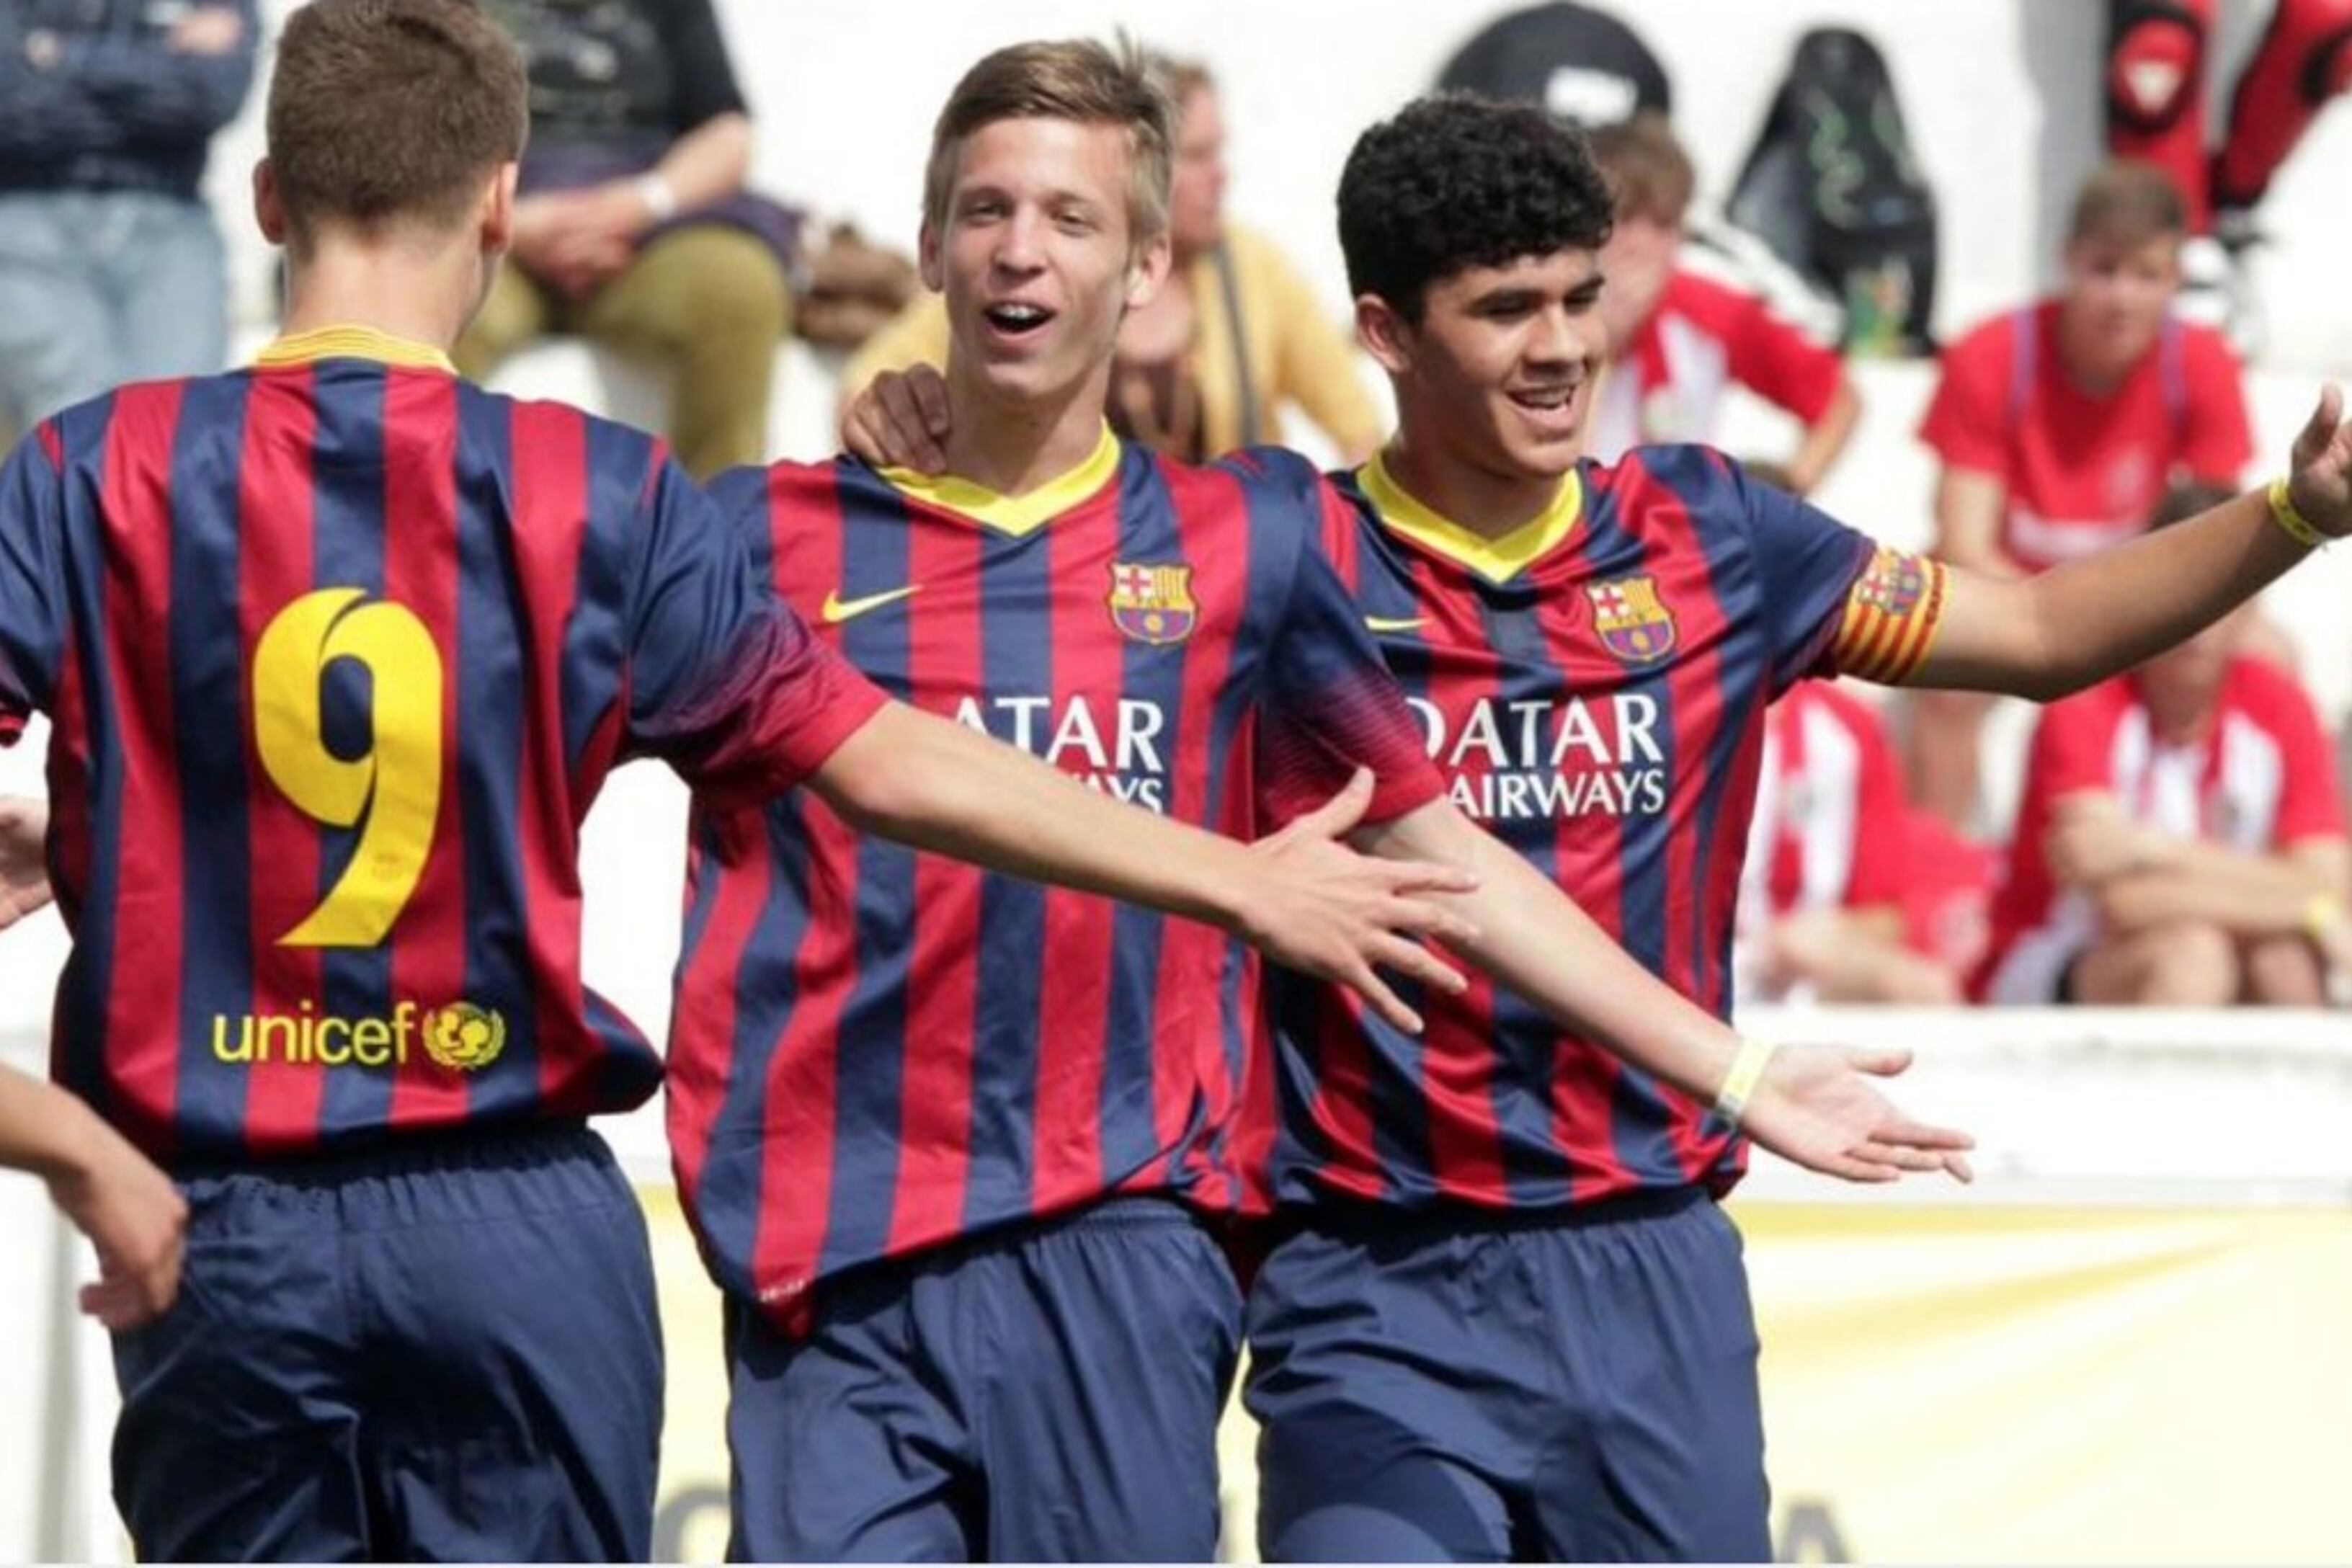 FC Barcelona had the new Andrés Iniesta in the youth team, released him and now wants him back